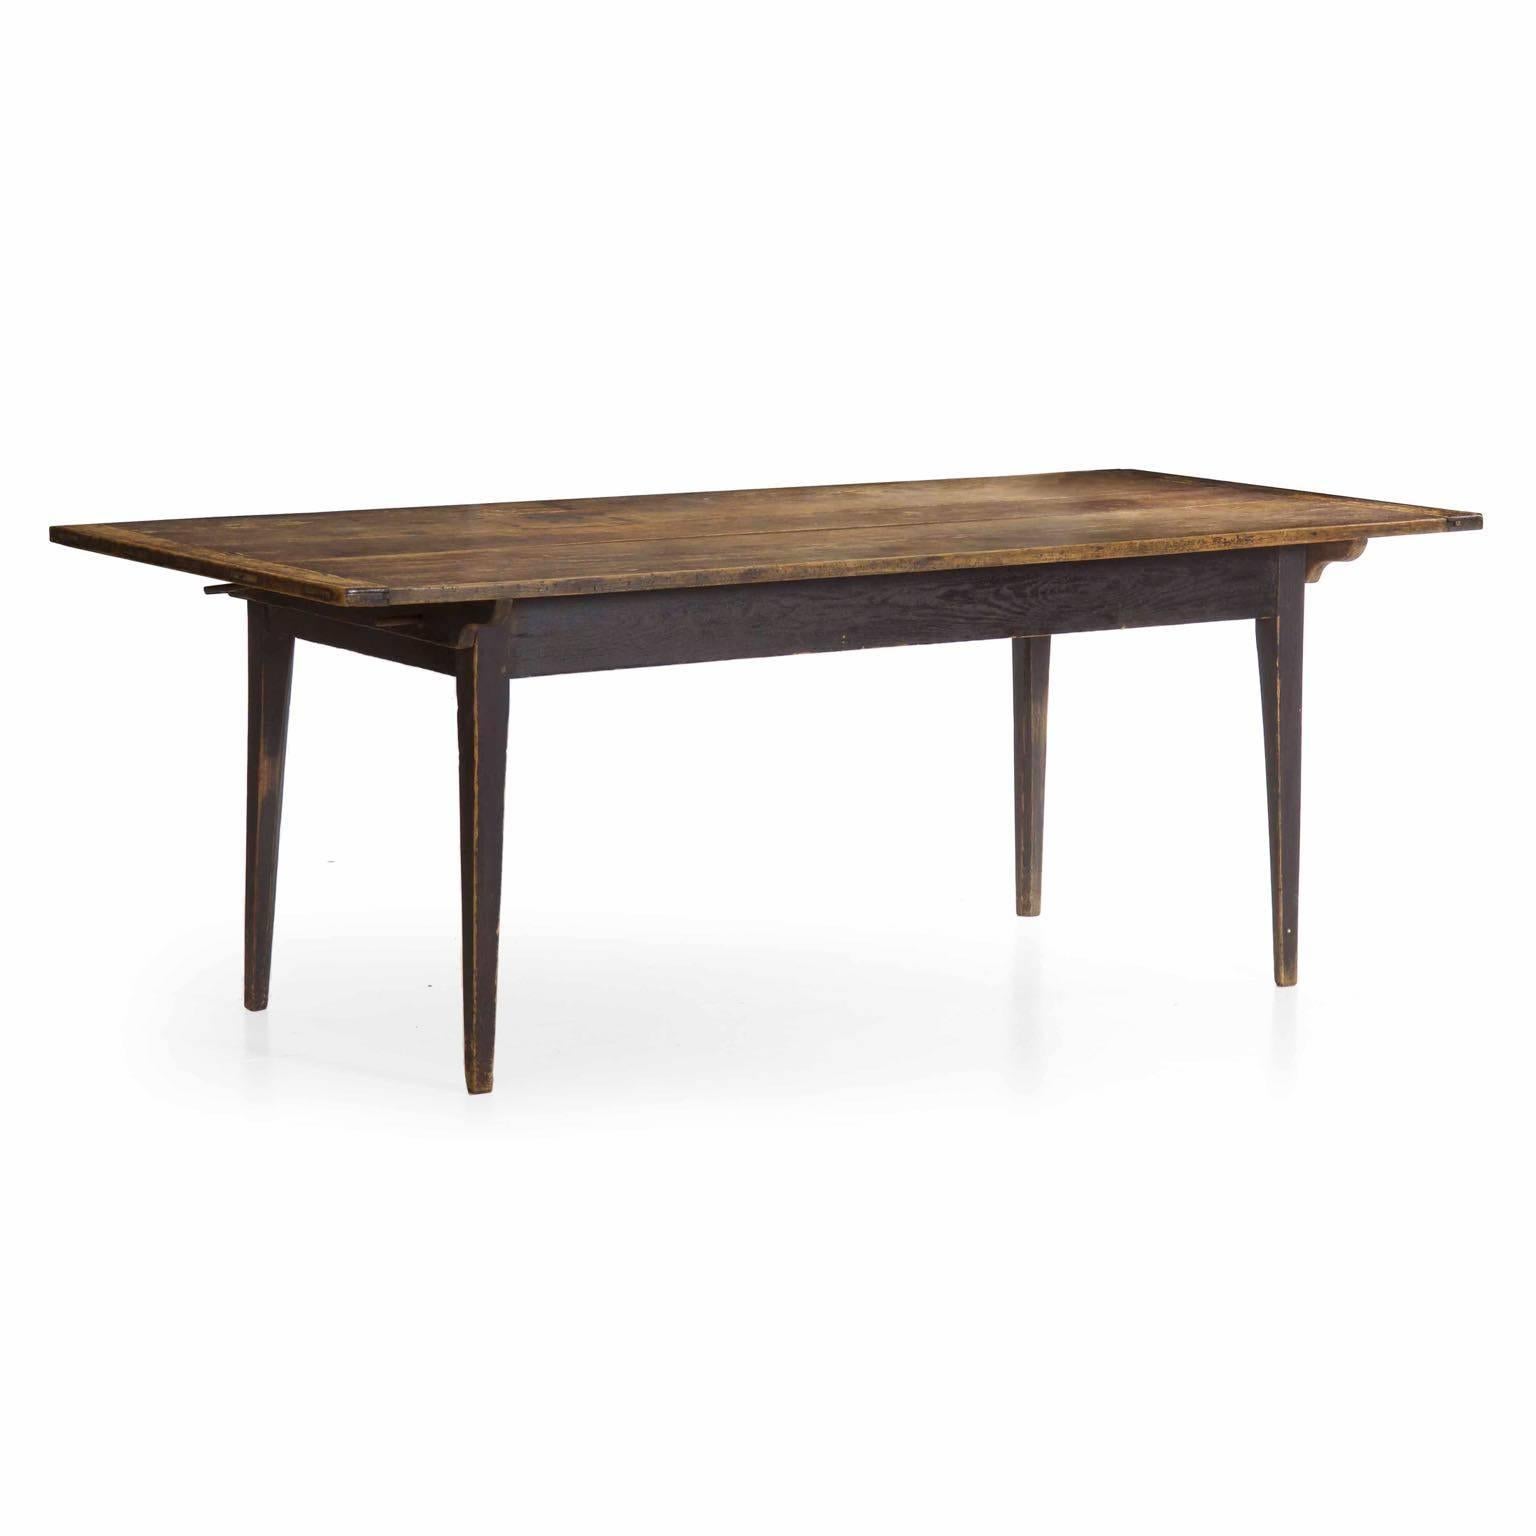 This gorgeous early scrubbed pine farm table was likely a product of the mid-Atlantic states during the last quarter of the 19th century. It is built with three large and beautifully patinated planks of pine flanked by breadboard ends that tenon